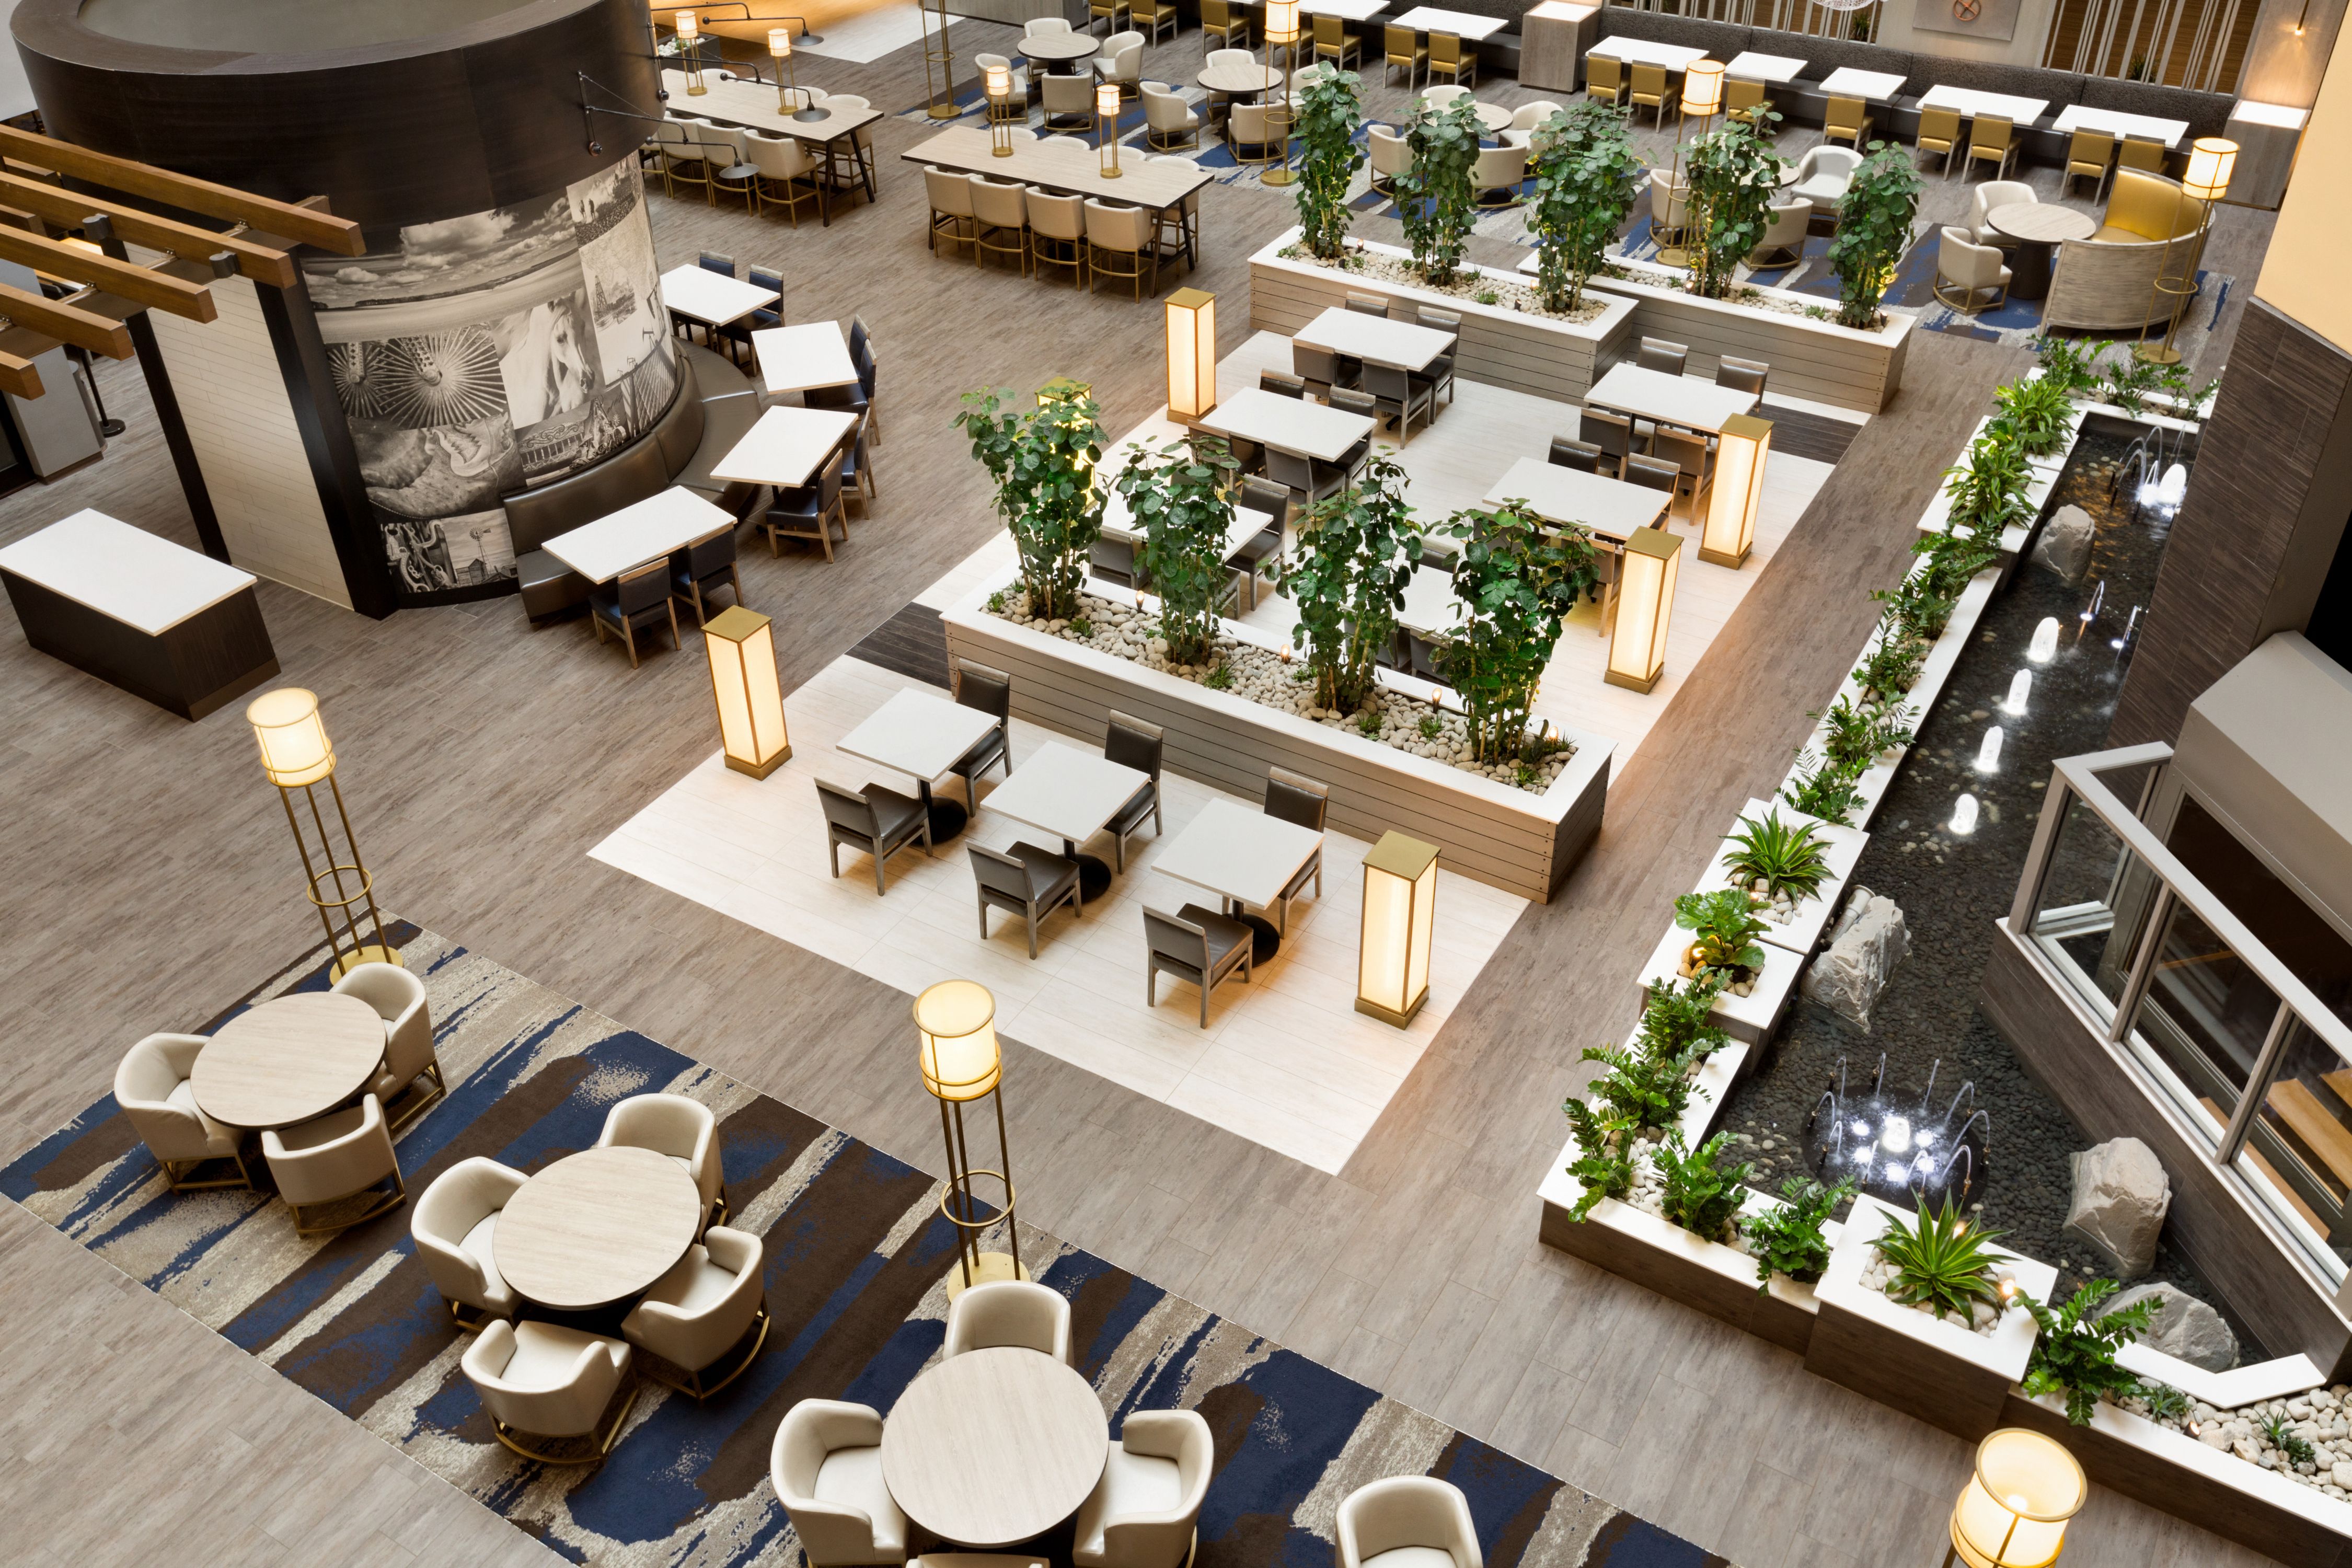 Ariel View of Lobby Atrium Seating Area with Seats and Tables